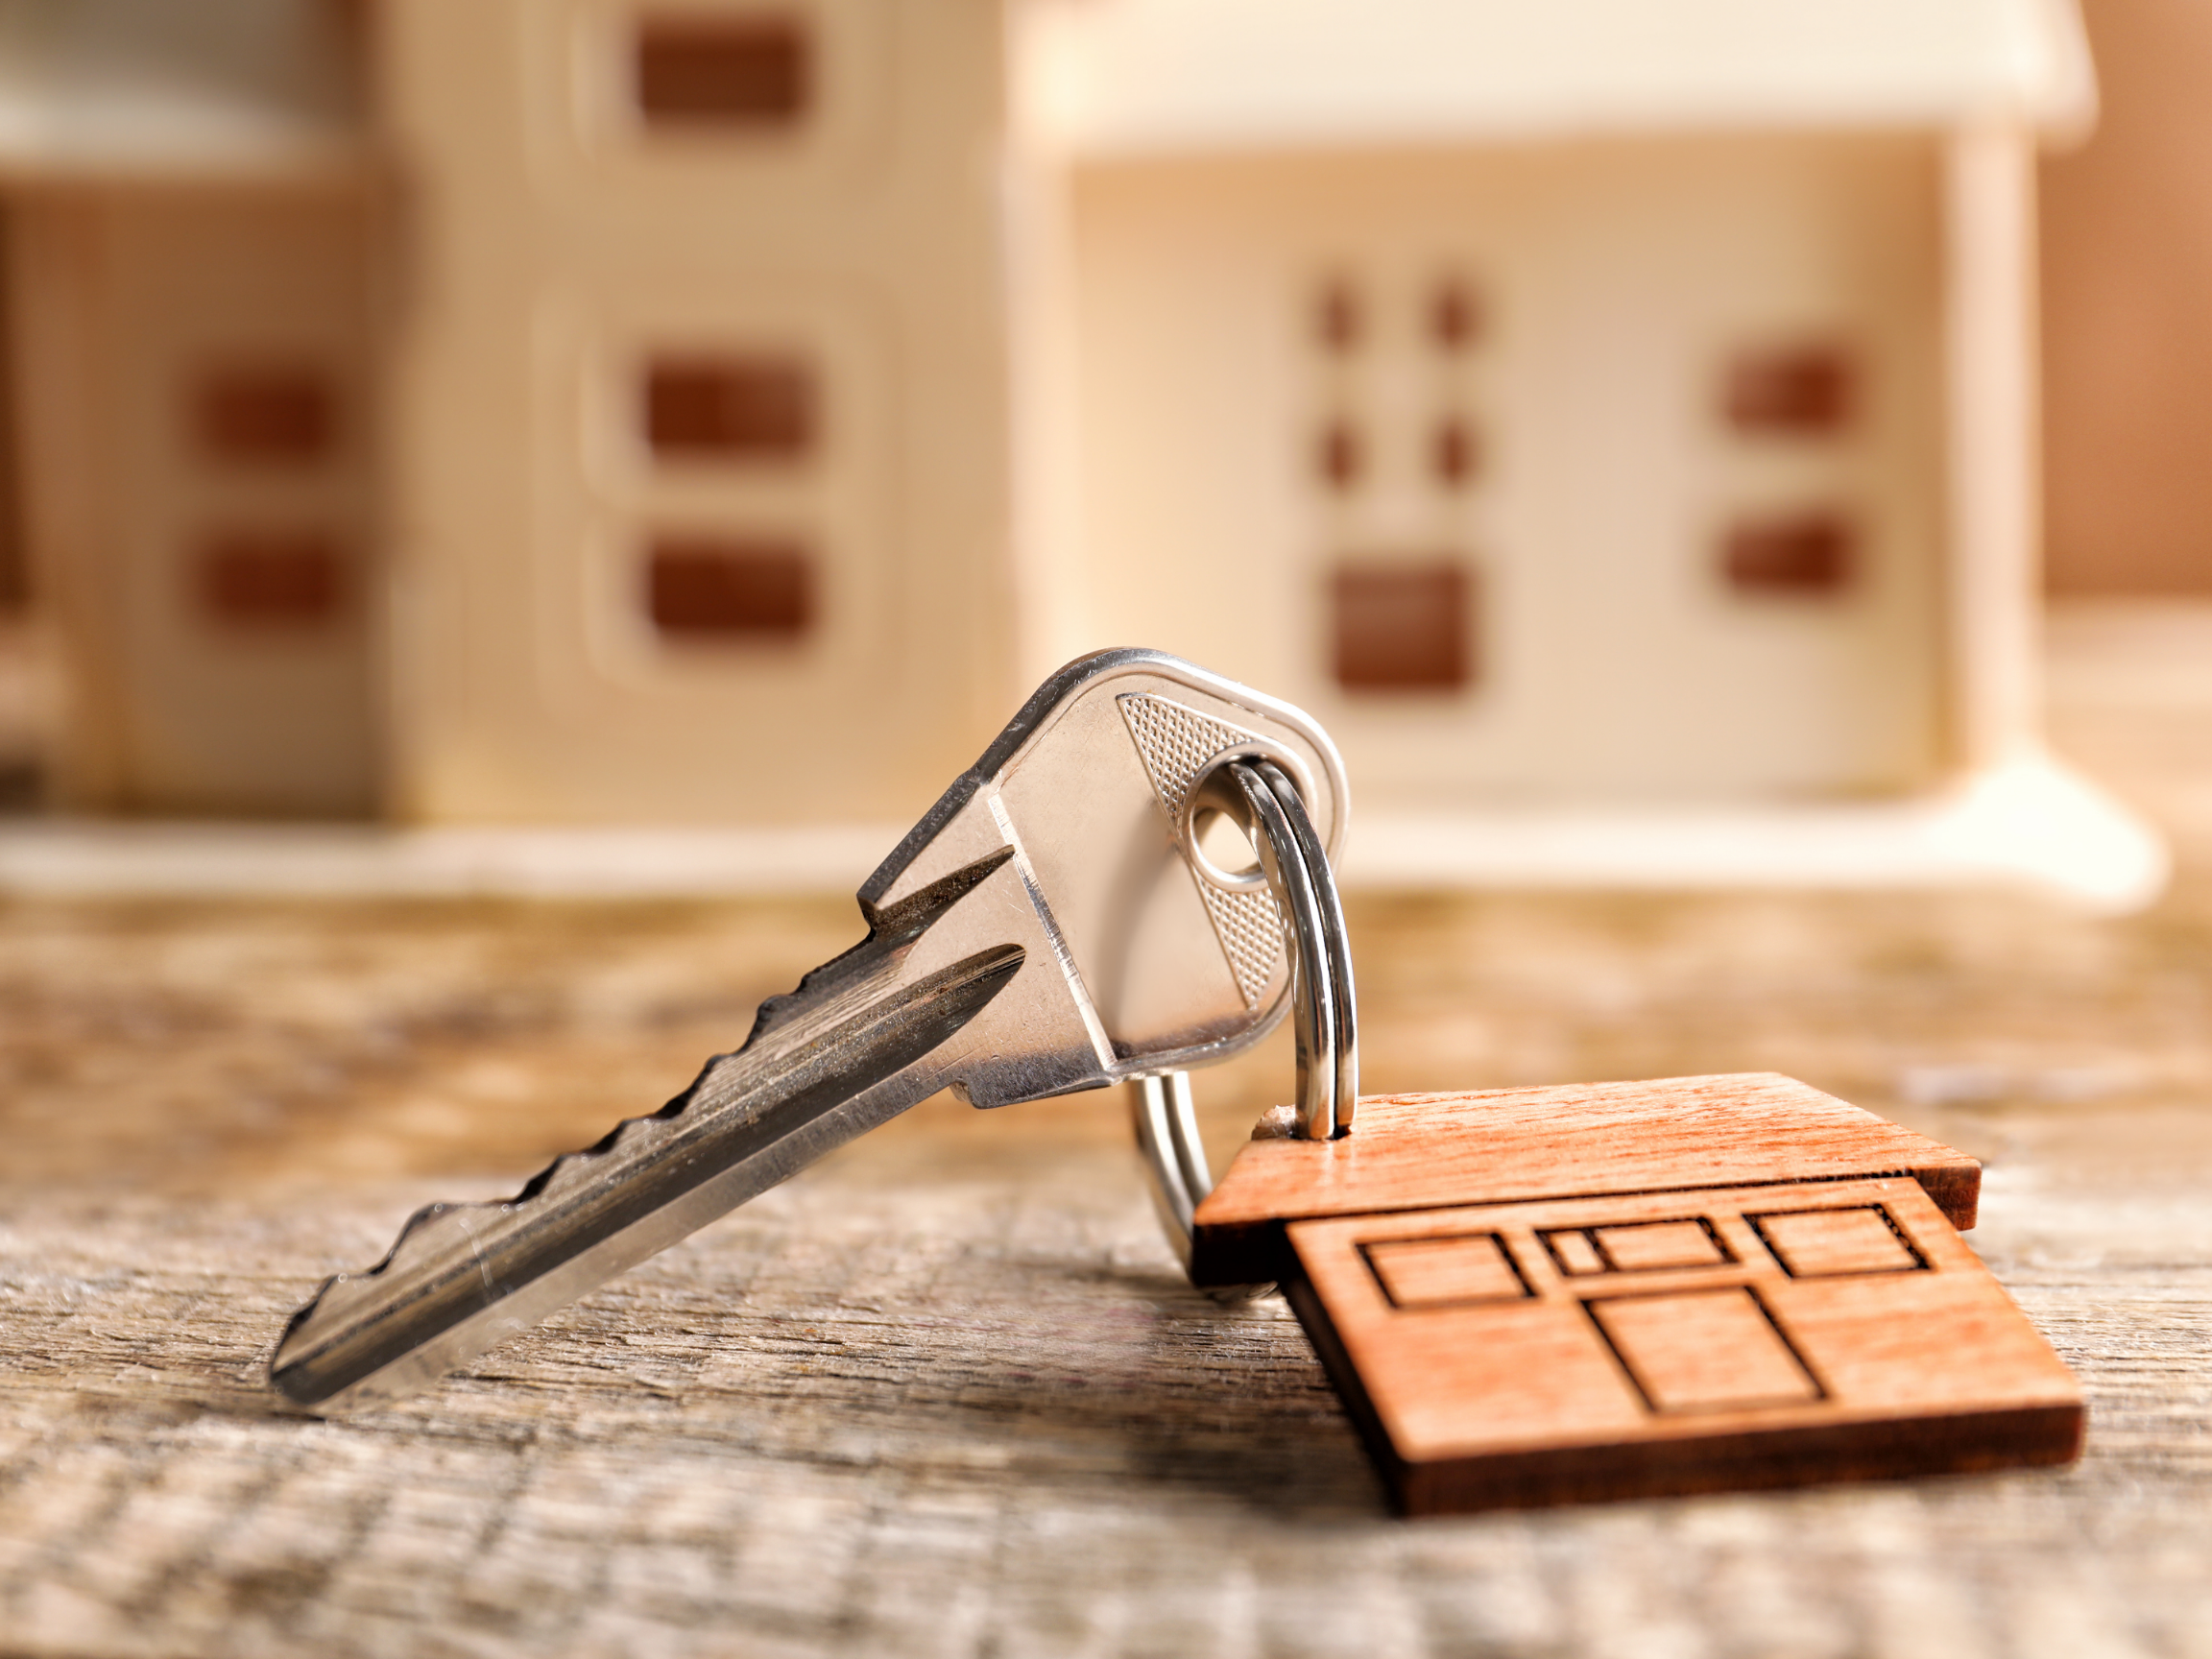 Image of a wooden house and some house keys